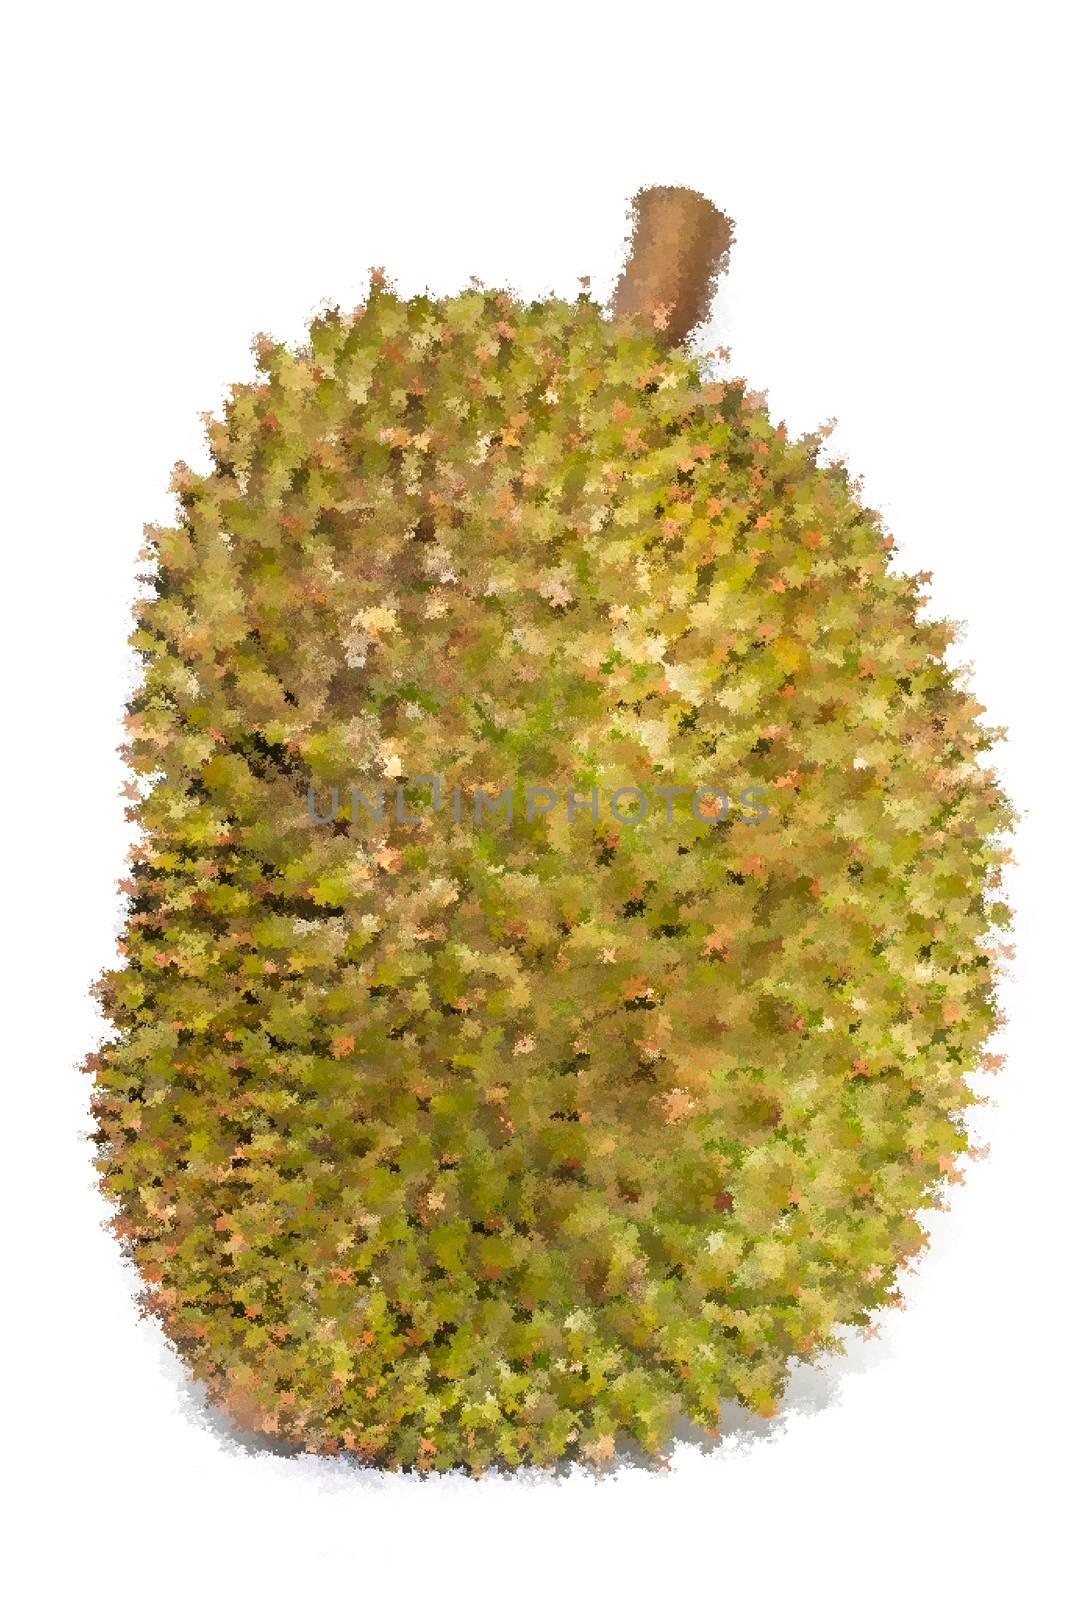 The Abstract Triangles of Durian fruit for background use, Illustration